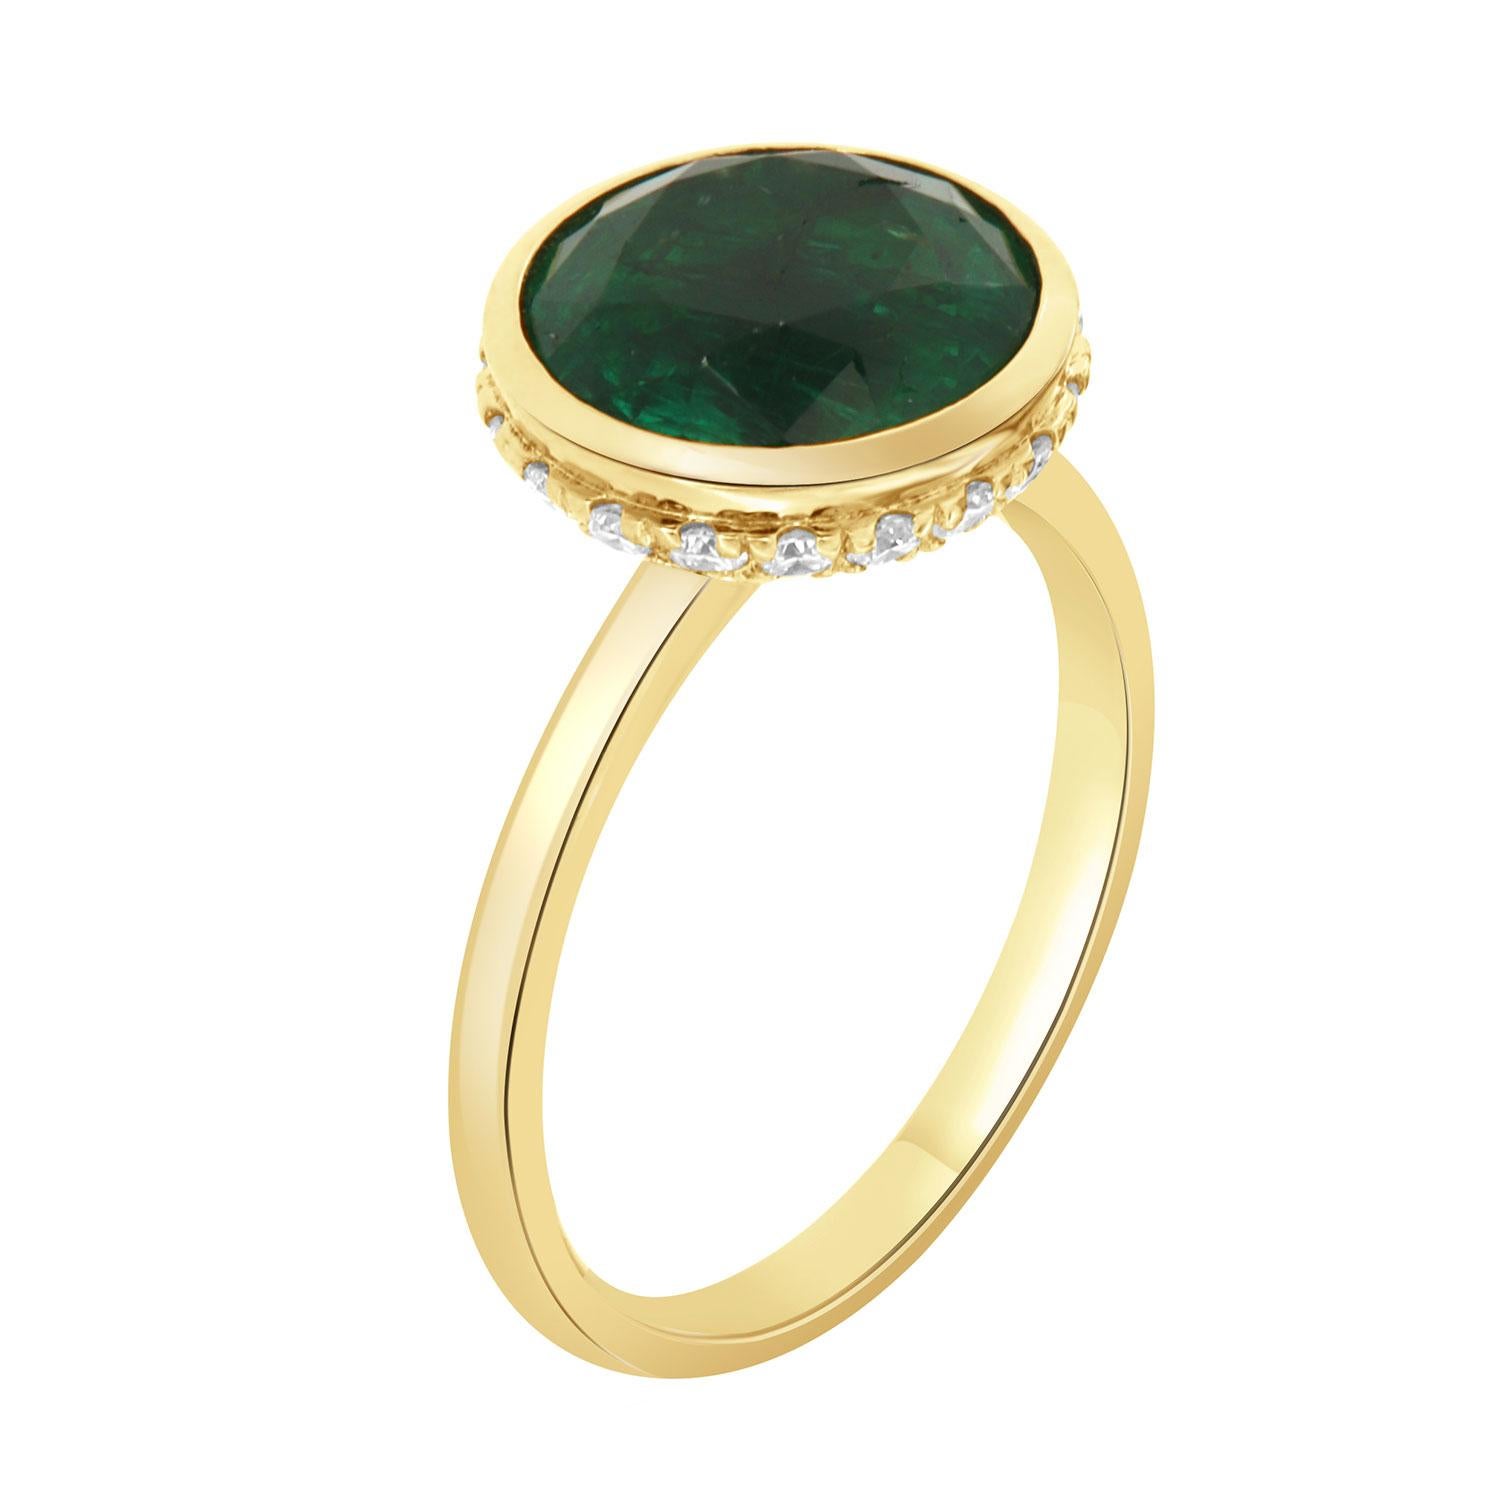 This beautiful 18K yellow gold ring features a GIA-certified 3.72 Carat Round-shaped Green Emerald bezel set.  A hidden halo of brilliant round diamonds encircled the crown on top of a 2.00 mm wide band. 
The diamonds total weight is 0.31 Carat
The